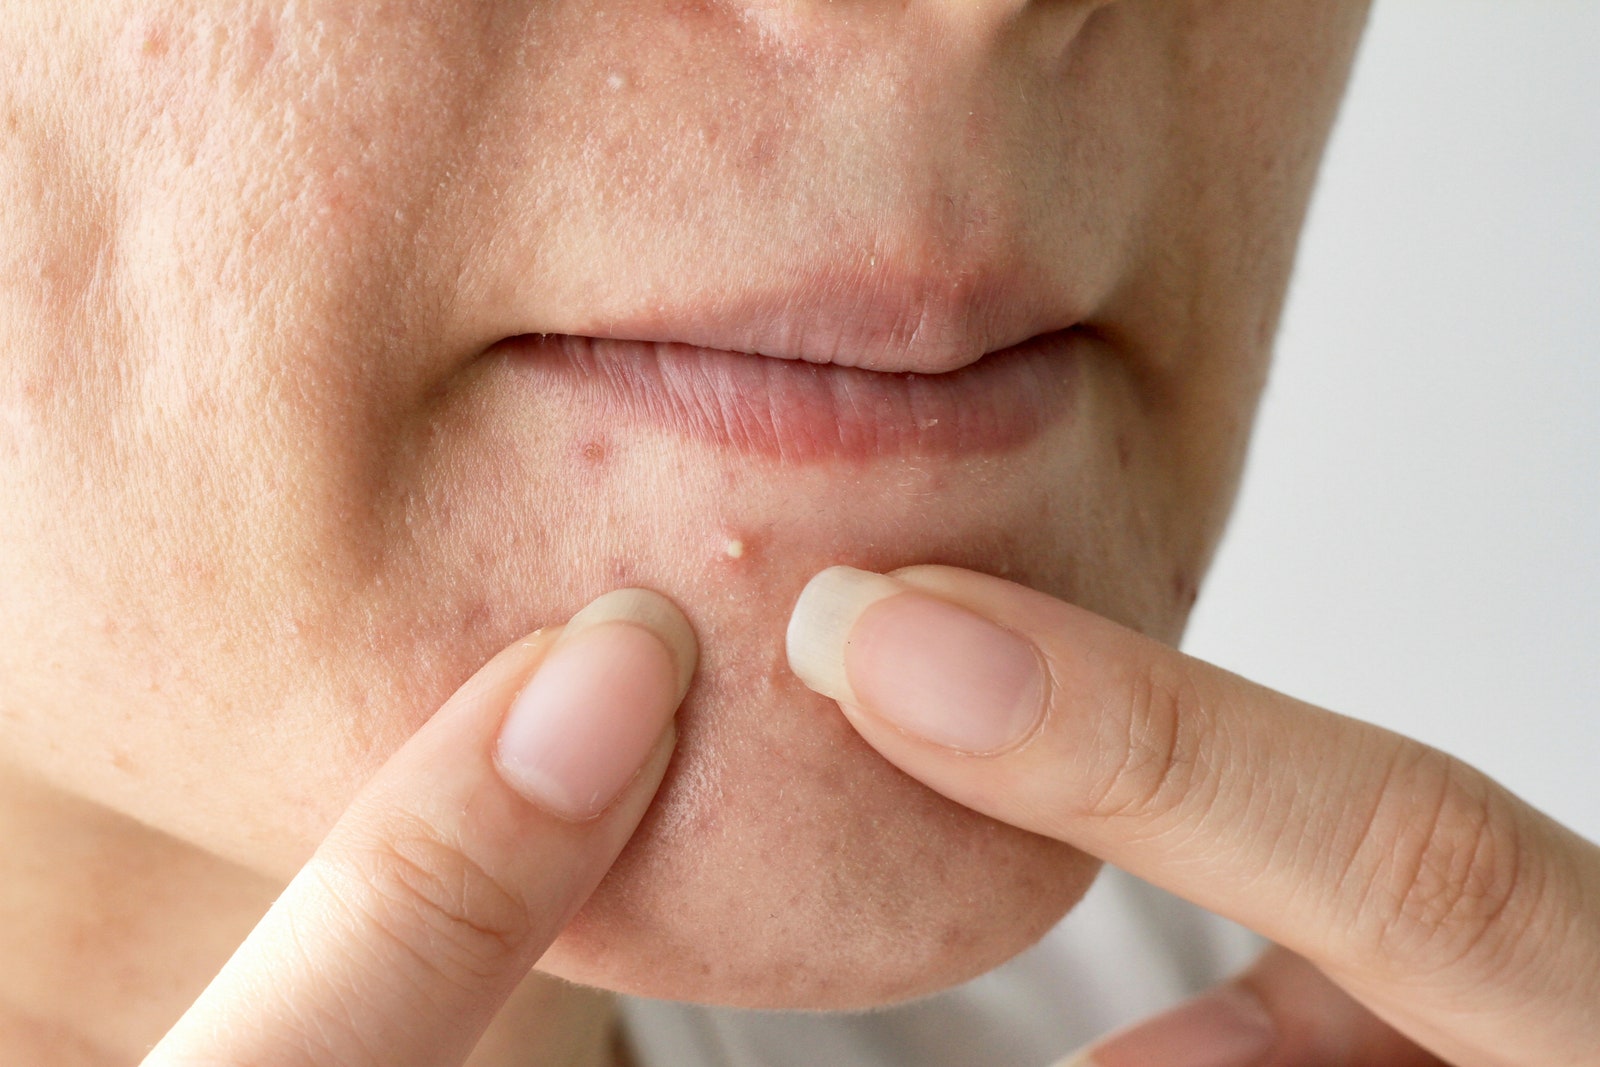 What's the best treatment for pimples?